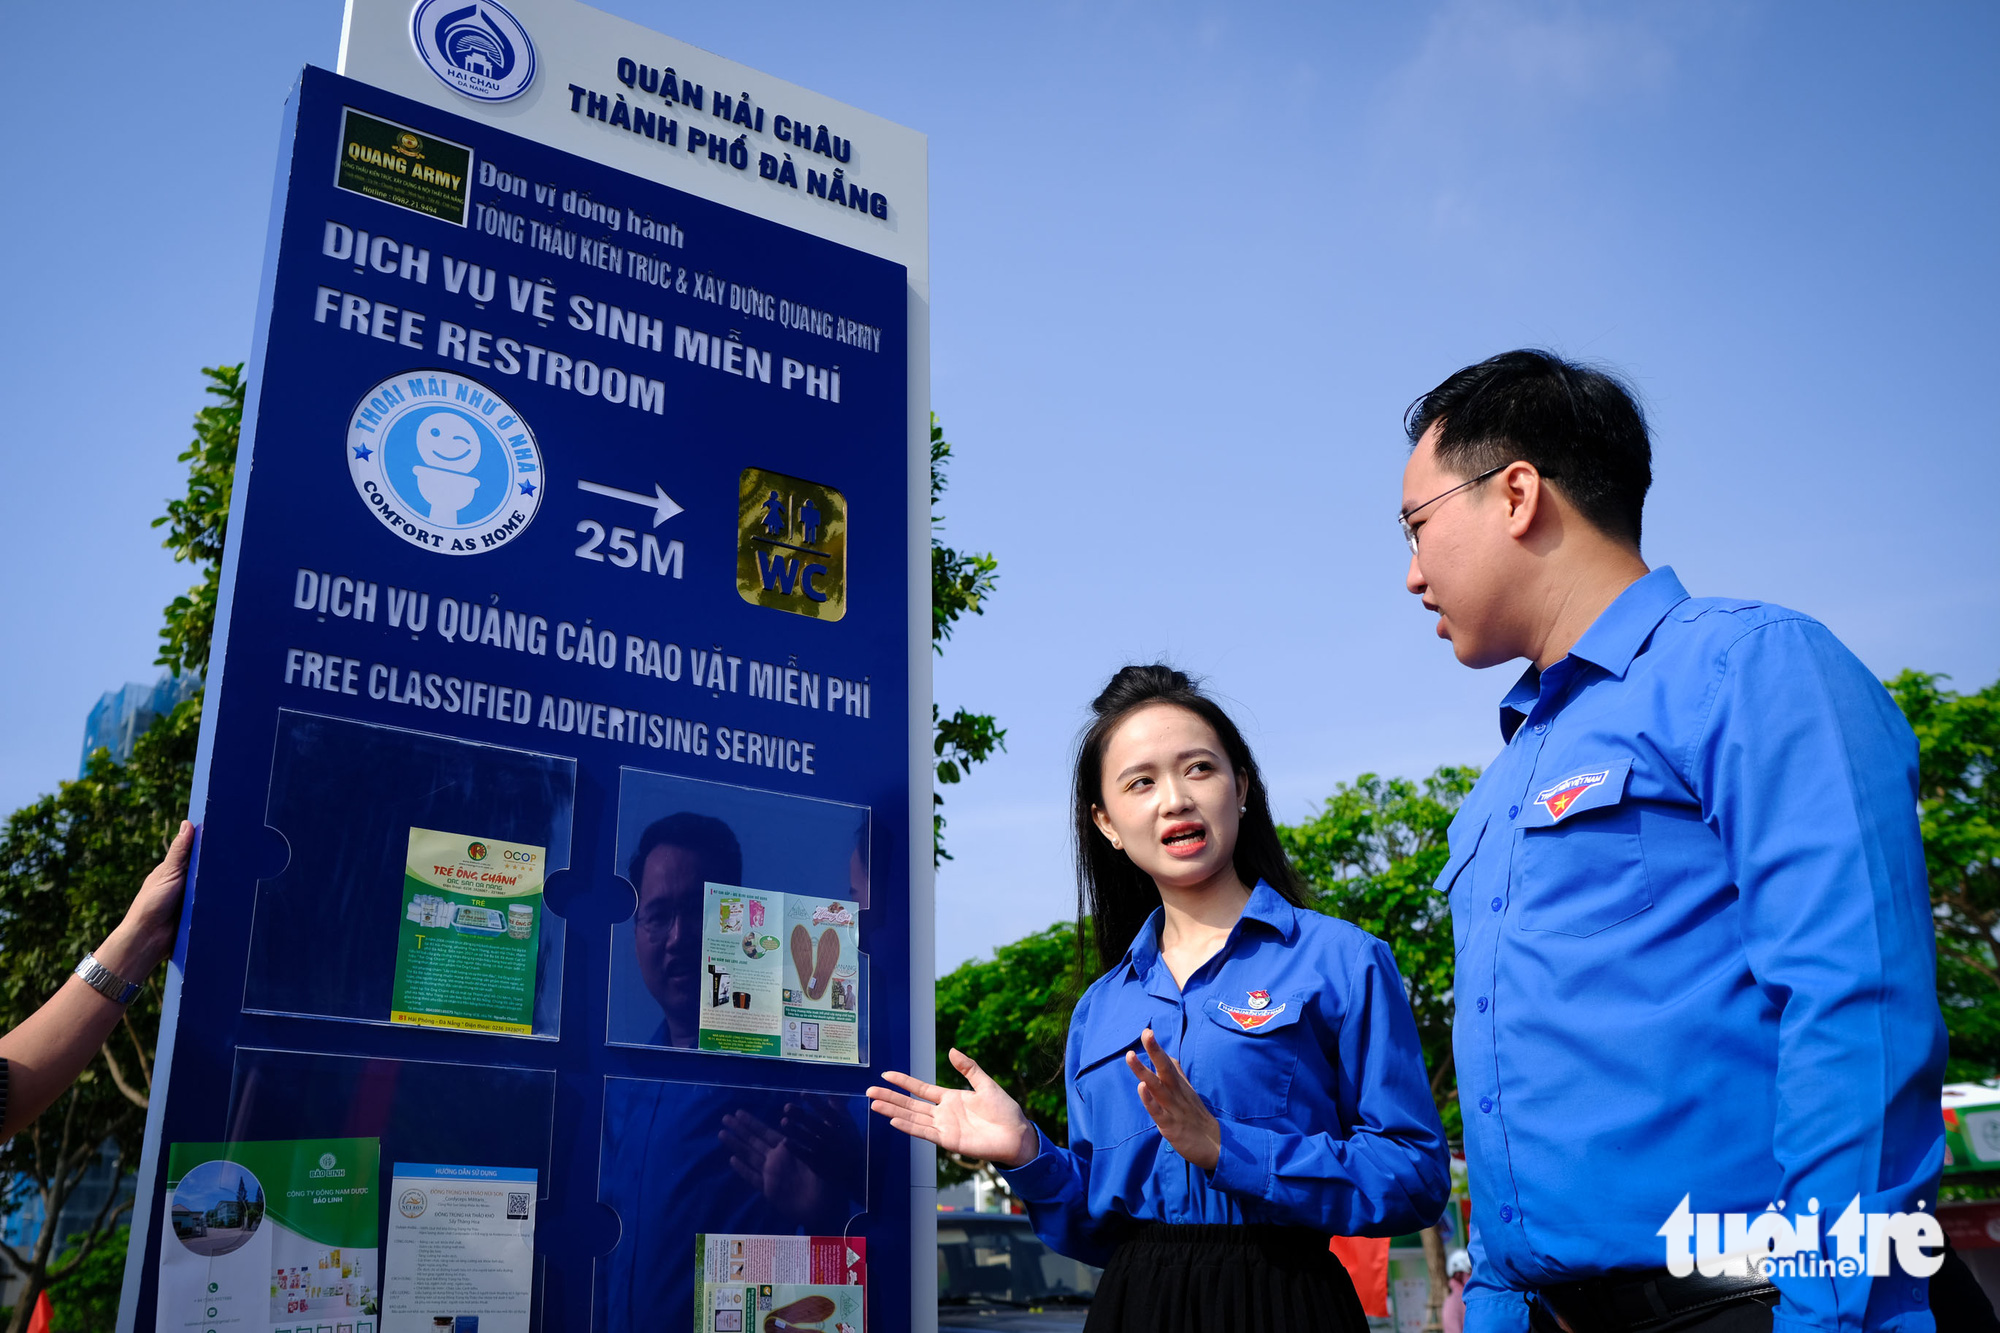 Hai Chau District in Da Nang City erects signboards to show the locations of free toilets. Photo: Tan Luc / Tuoi Tre